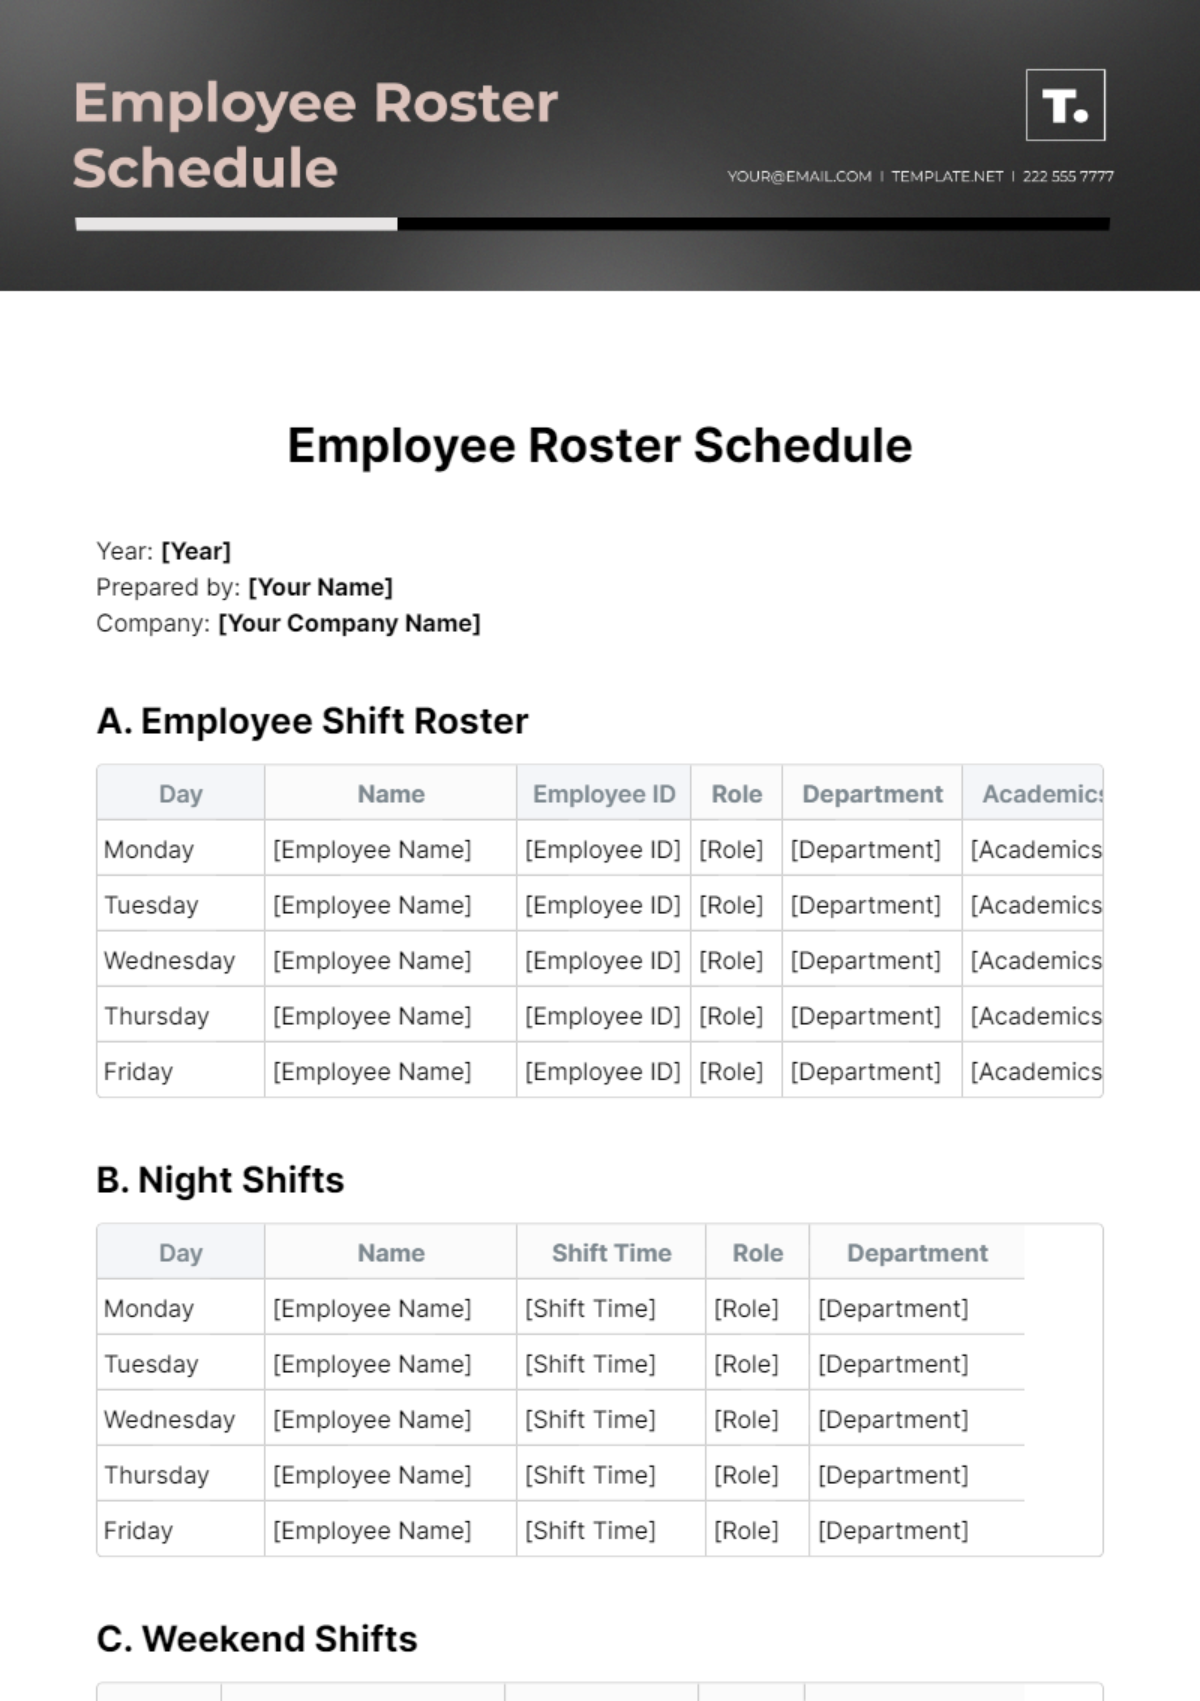 Employee Roster Schedule Template